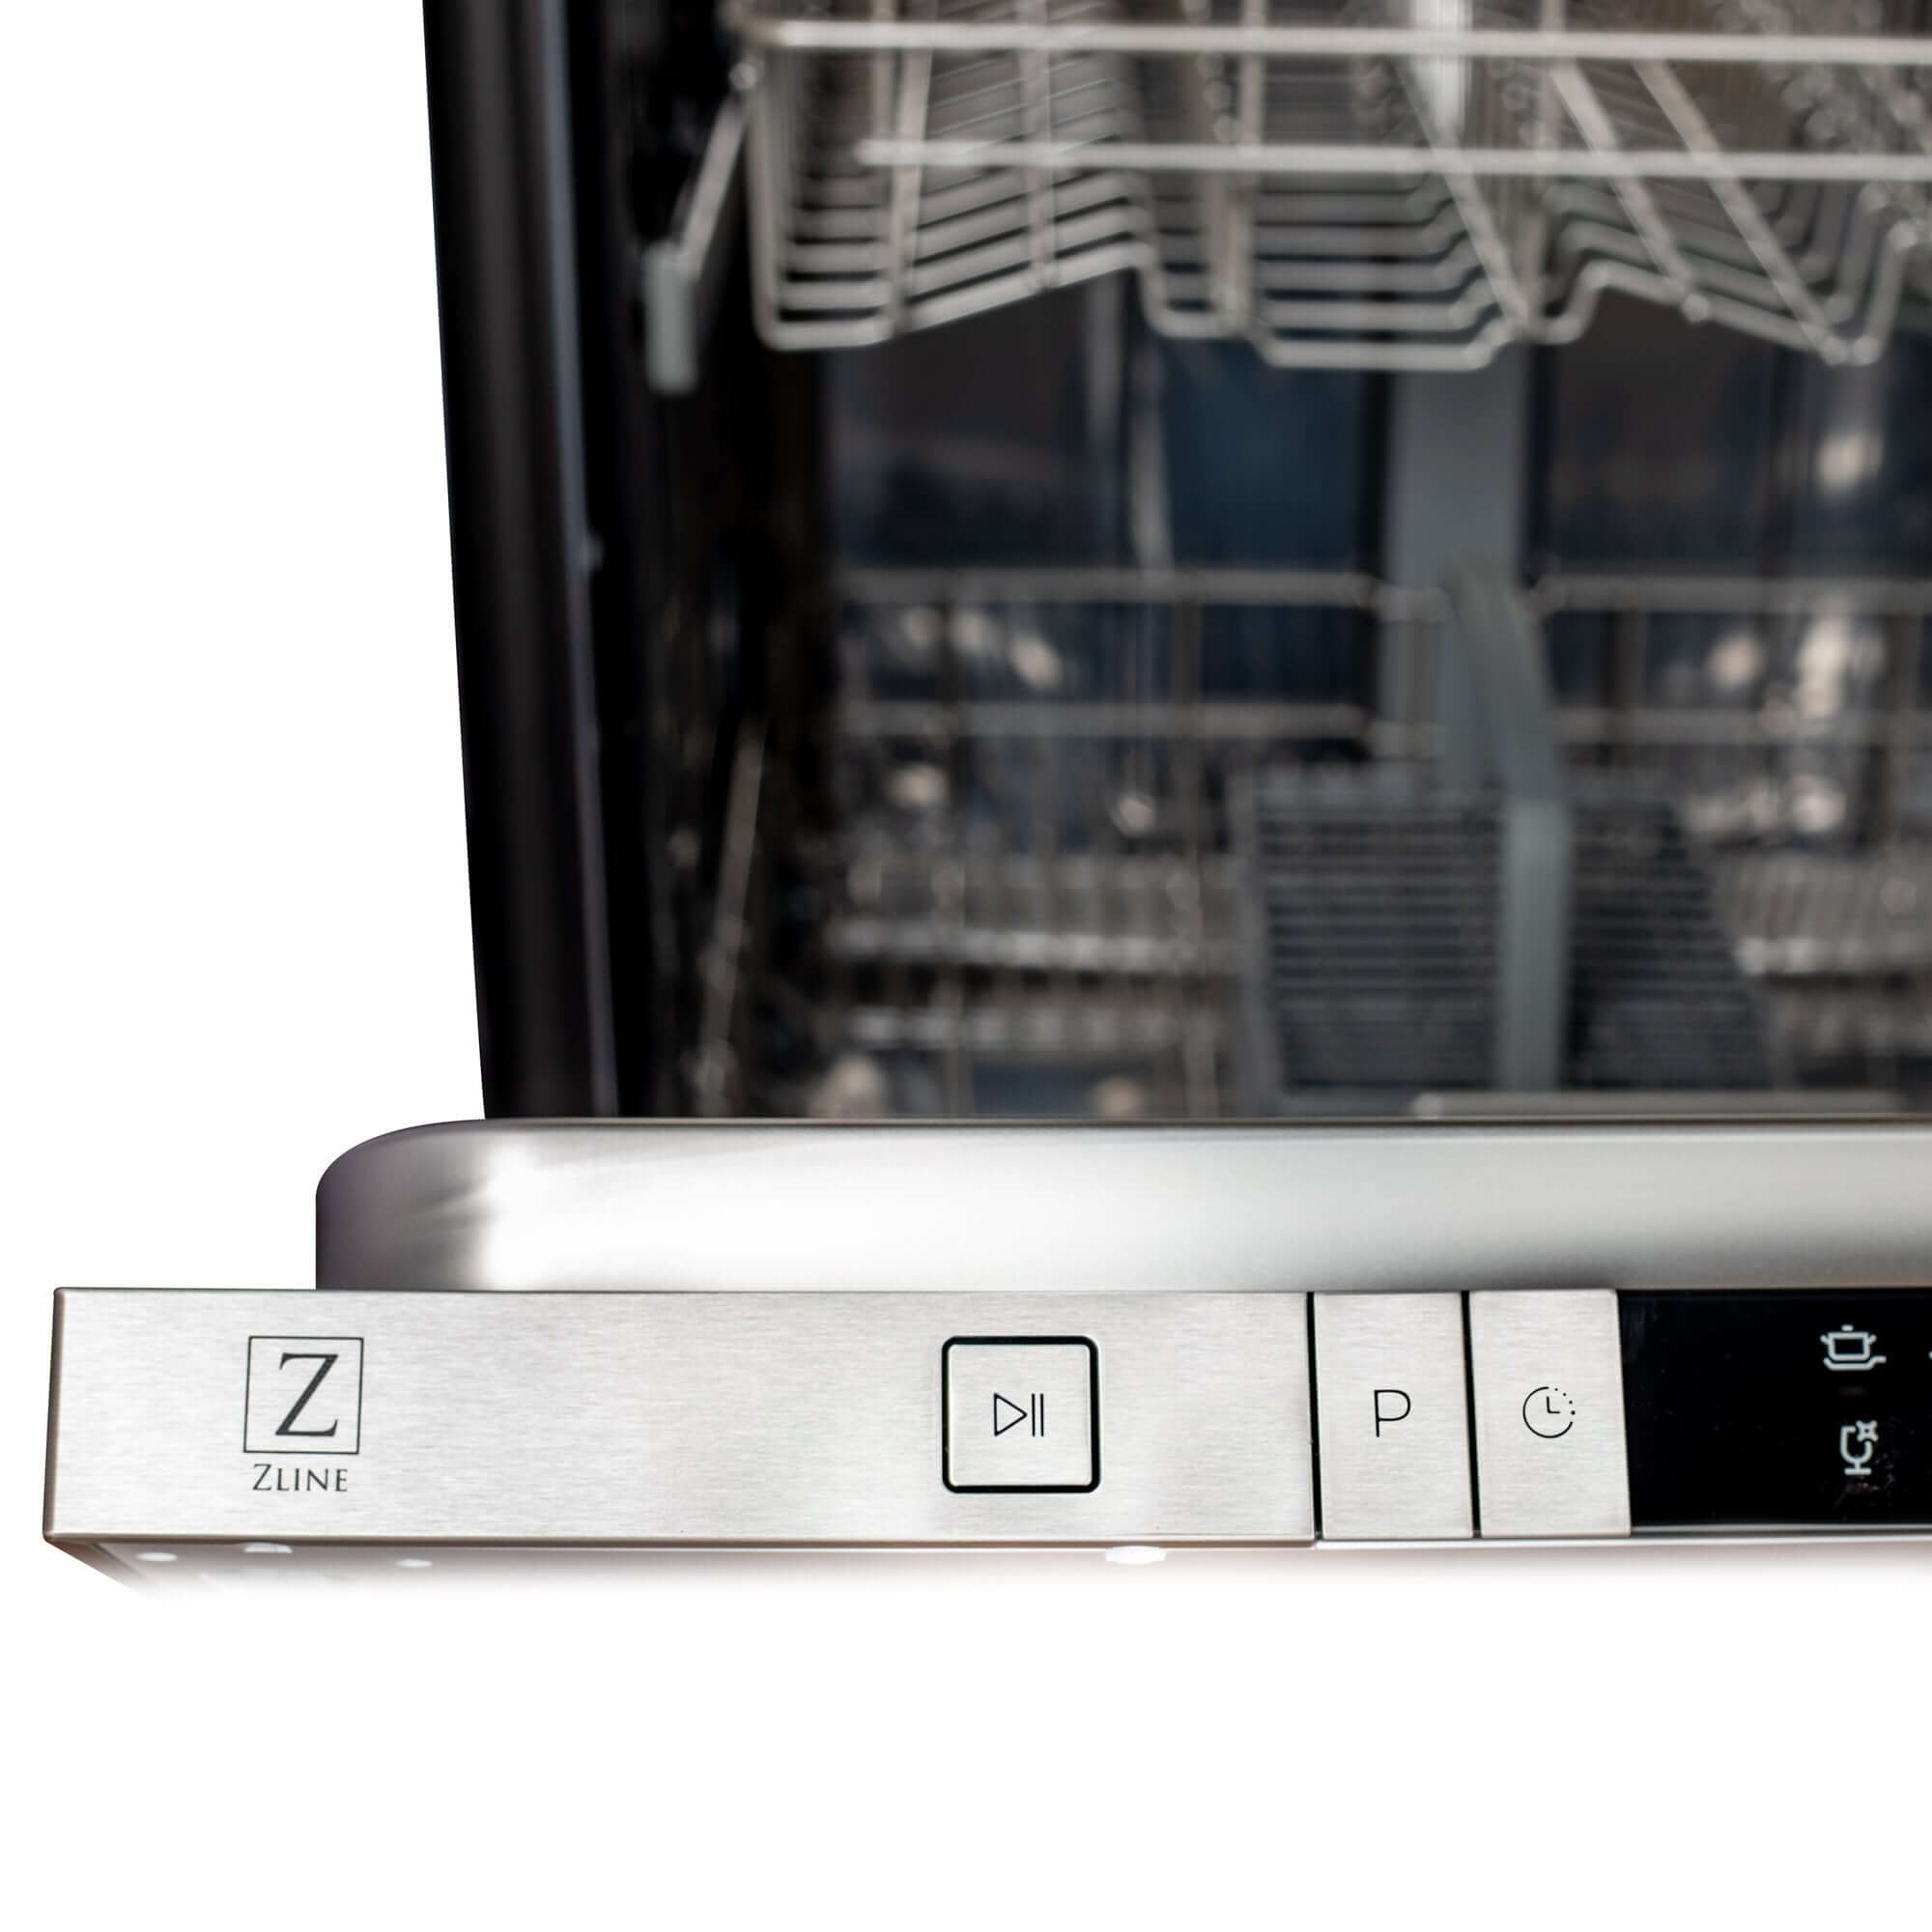 ZLINE 24 in. Panel Ready Top Control Dishwasher with Stainless Steel Tub, 52dBa (DW7713-24) Hidden Top Control Panel Allows for a Seamless Built-in Look